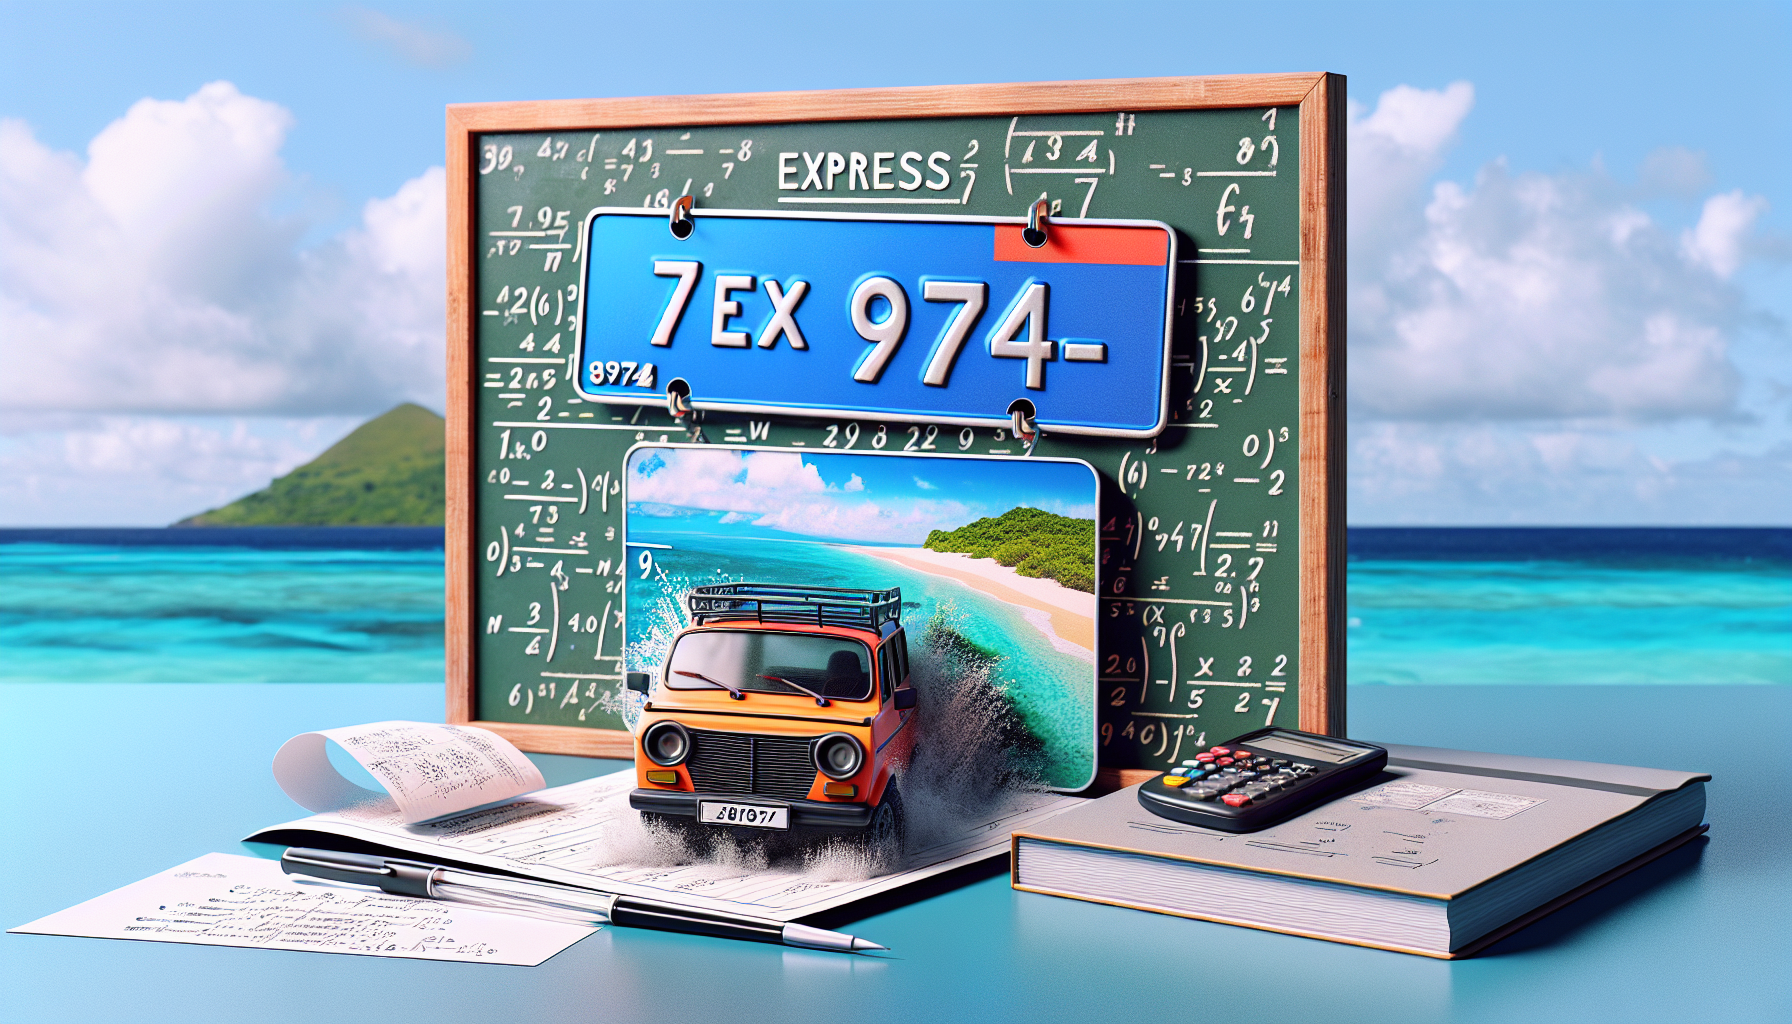 learn how to calculate the cost of your vehicle registration in la réunion with carte grise express 974. get the fastest and easiest way to obtain your carte grise with our hassle-free service.